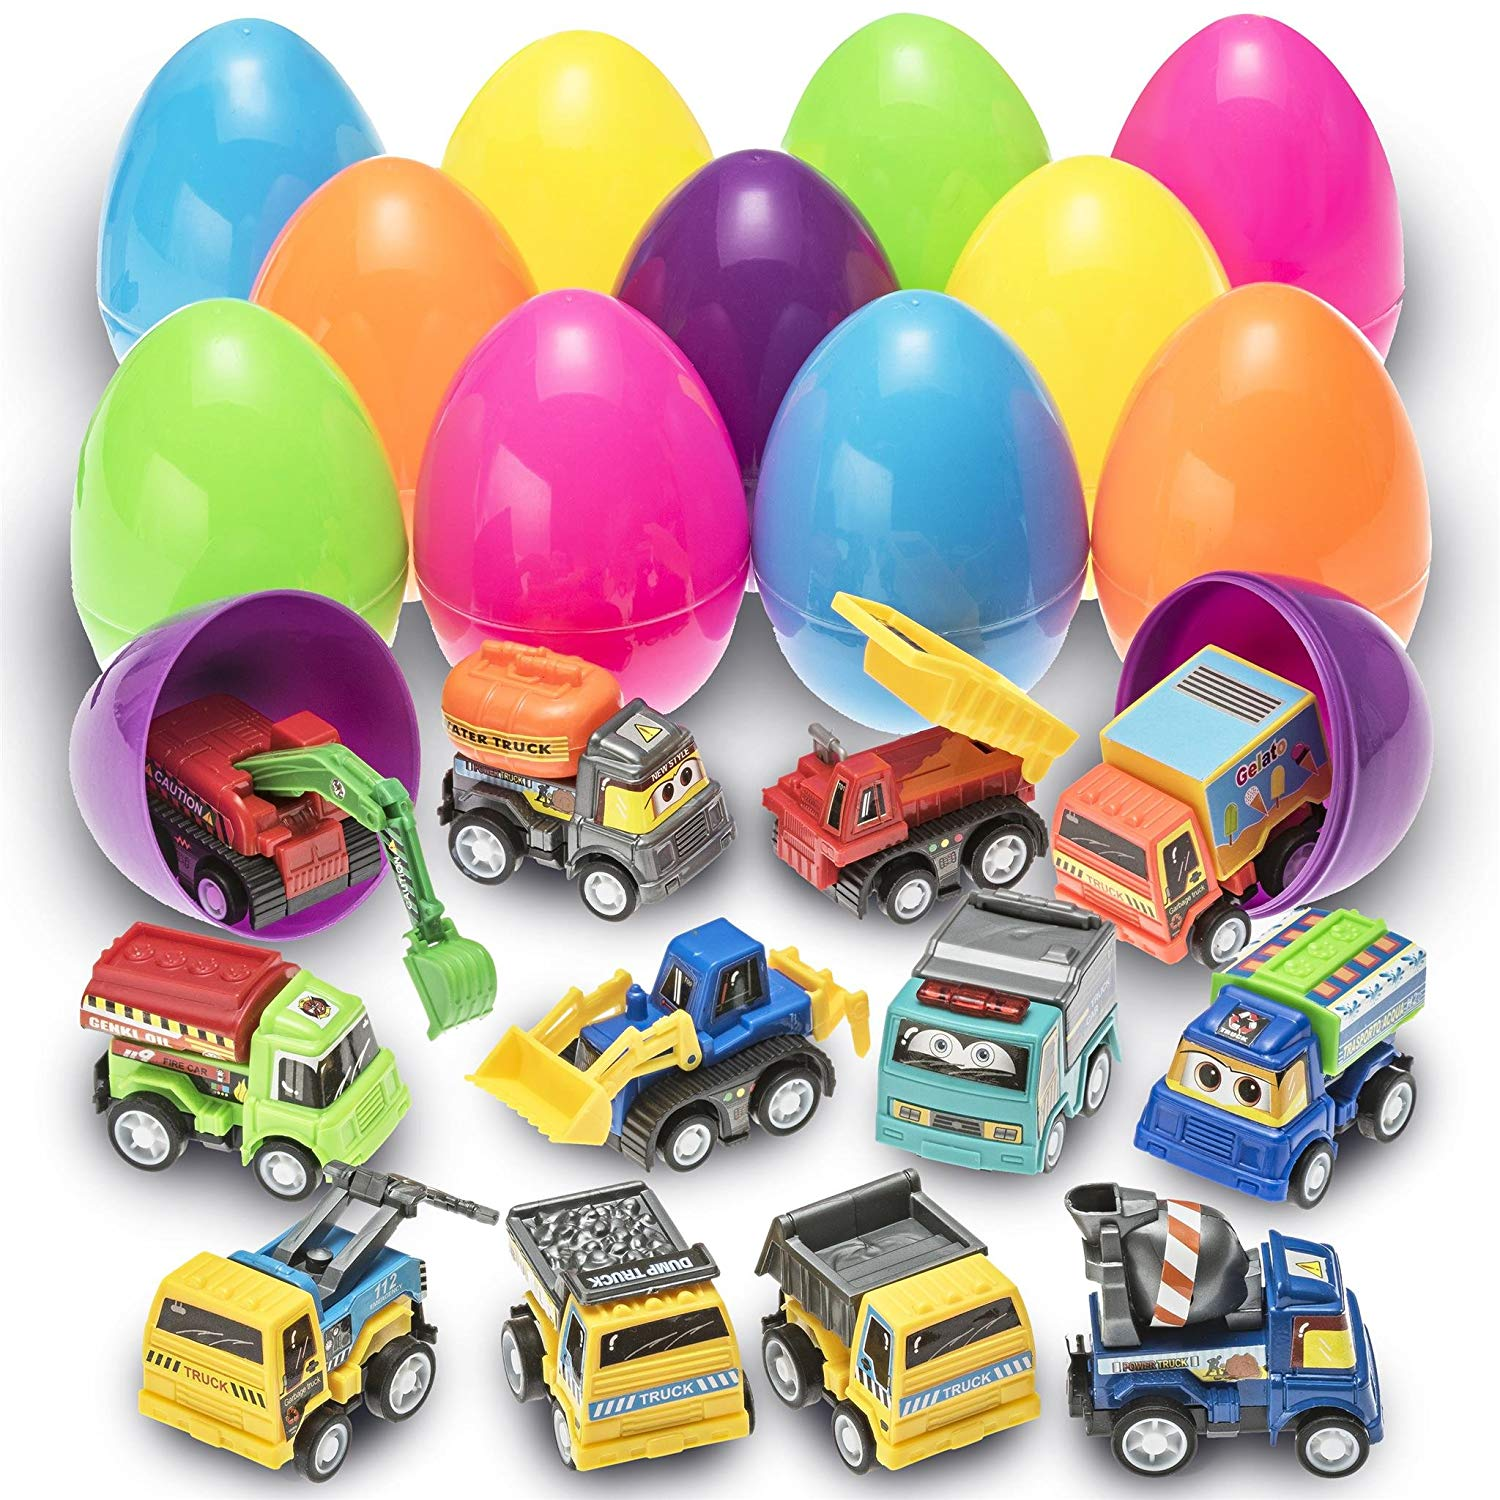 Prextex Pull-Back Construction Vehicle Toy Filled Easter Eggs Only $18.99!